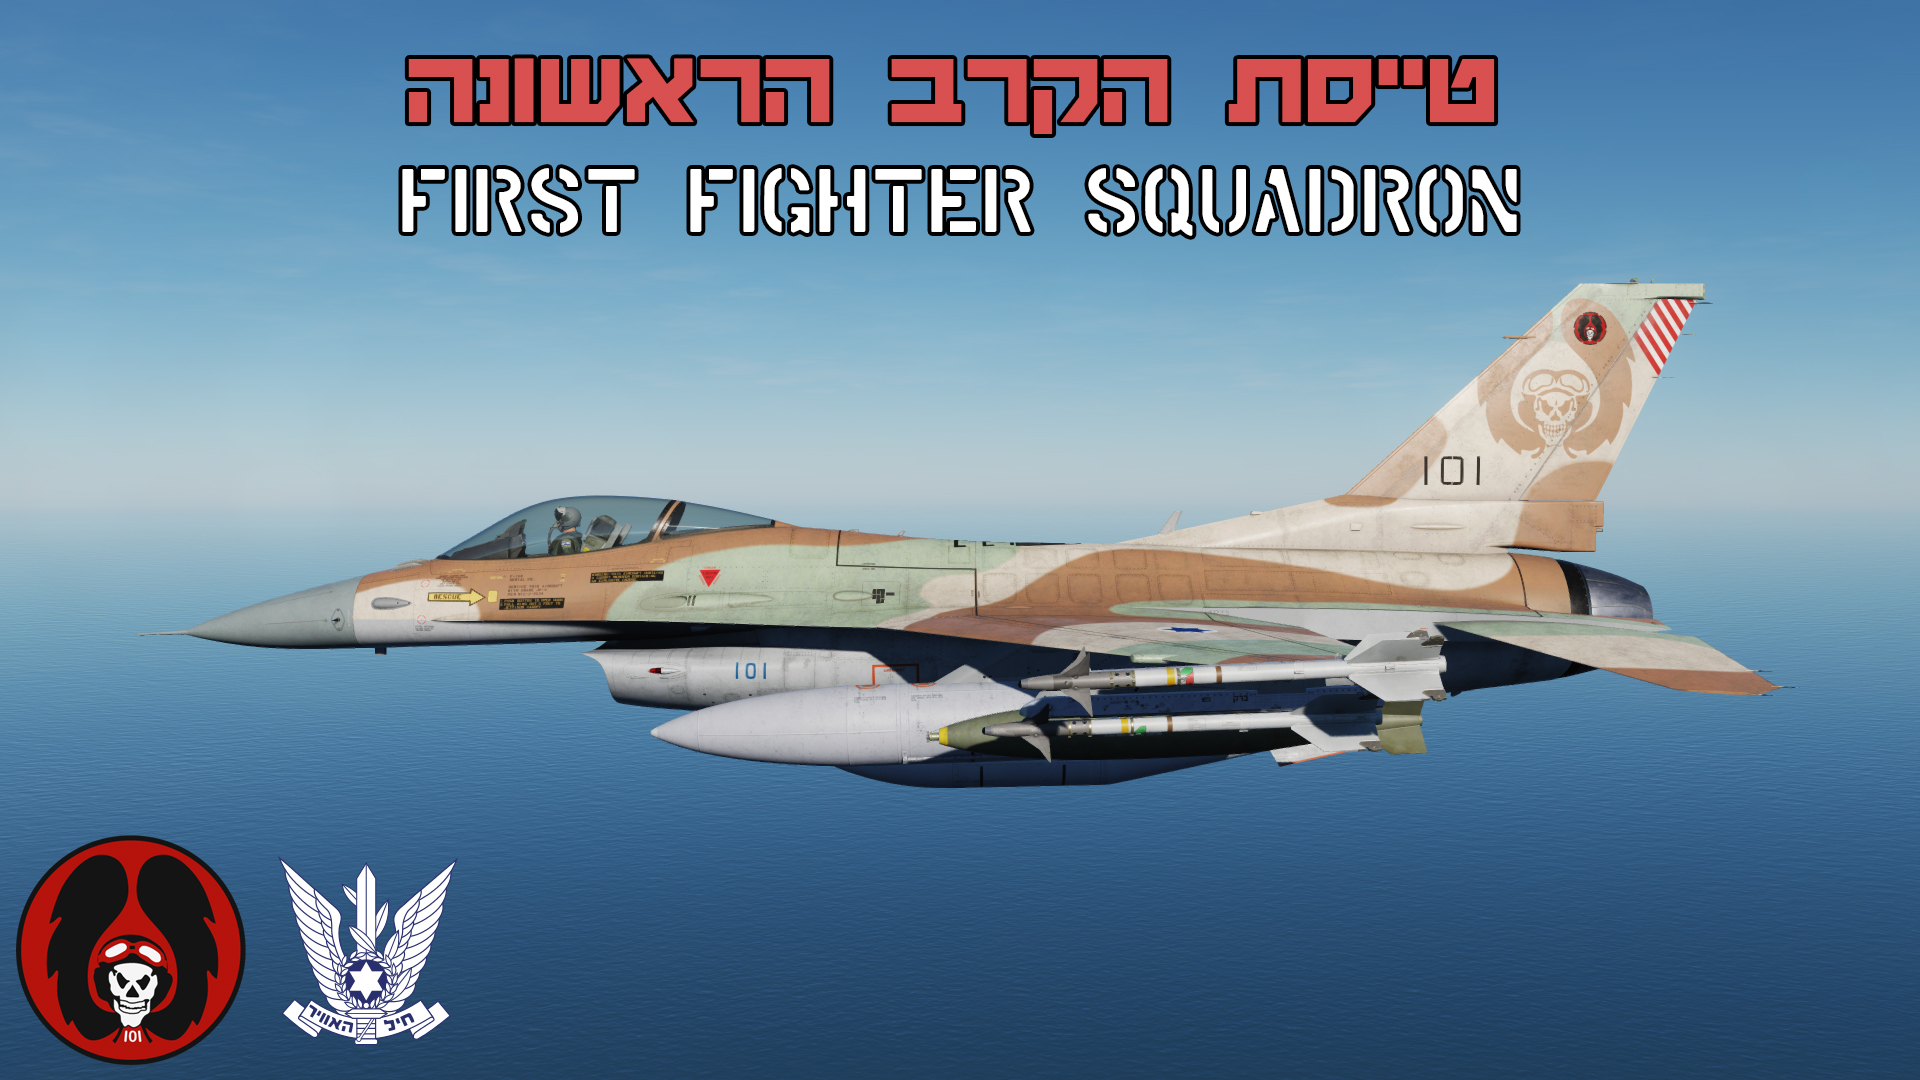 F-16C Israeli Air Force 101st squadron "The first fighter squadron" (Barak) V1.31